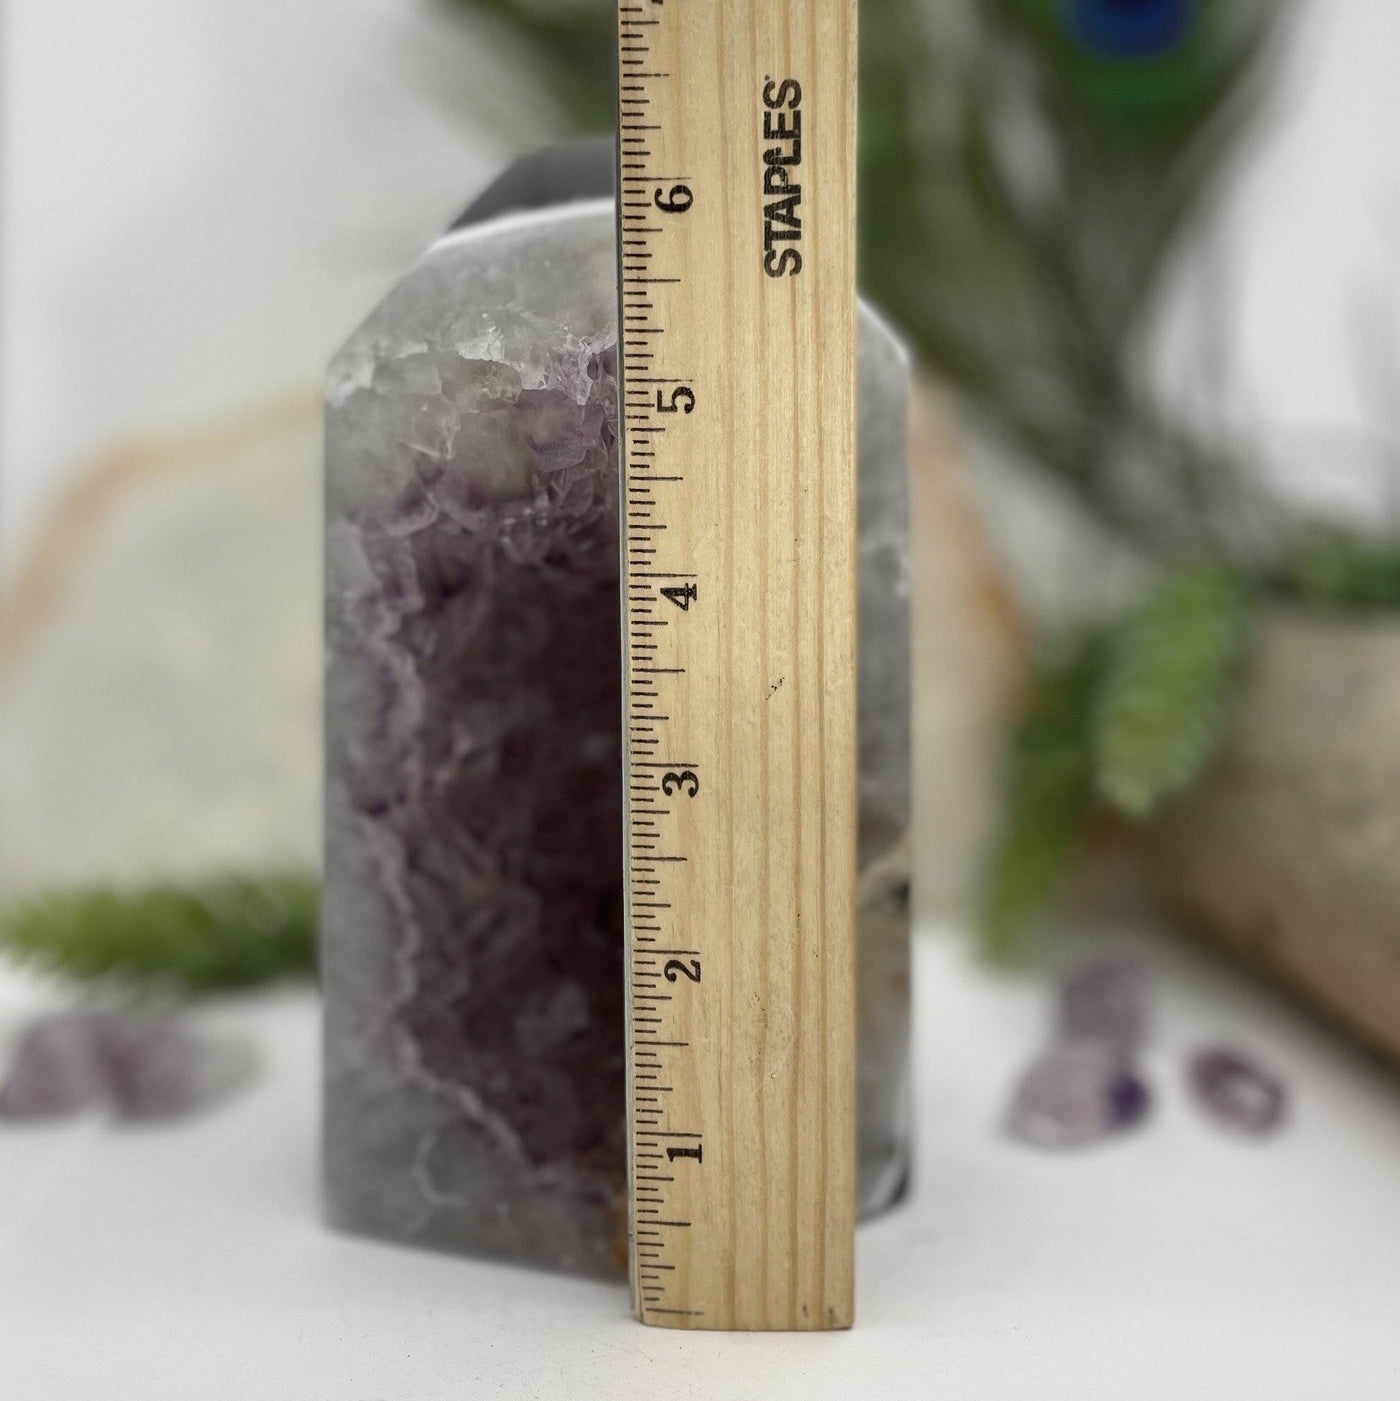 Amethyst Polished Point with ruler in front of it for size reference